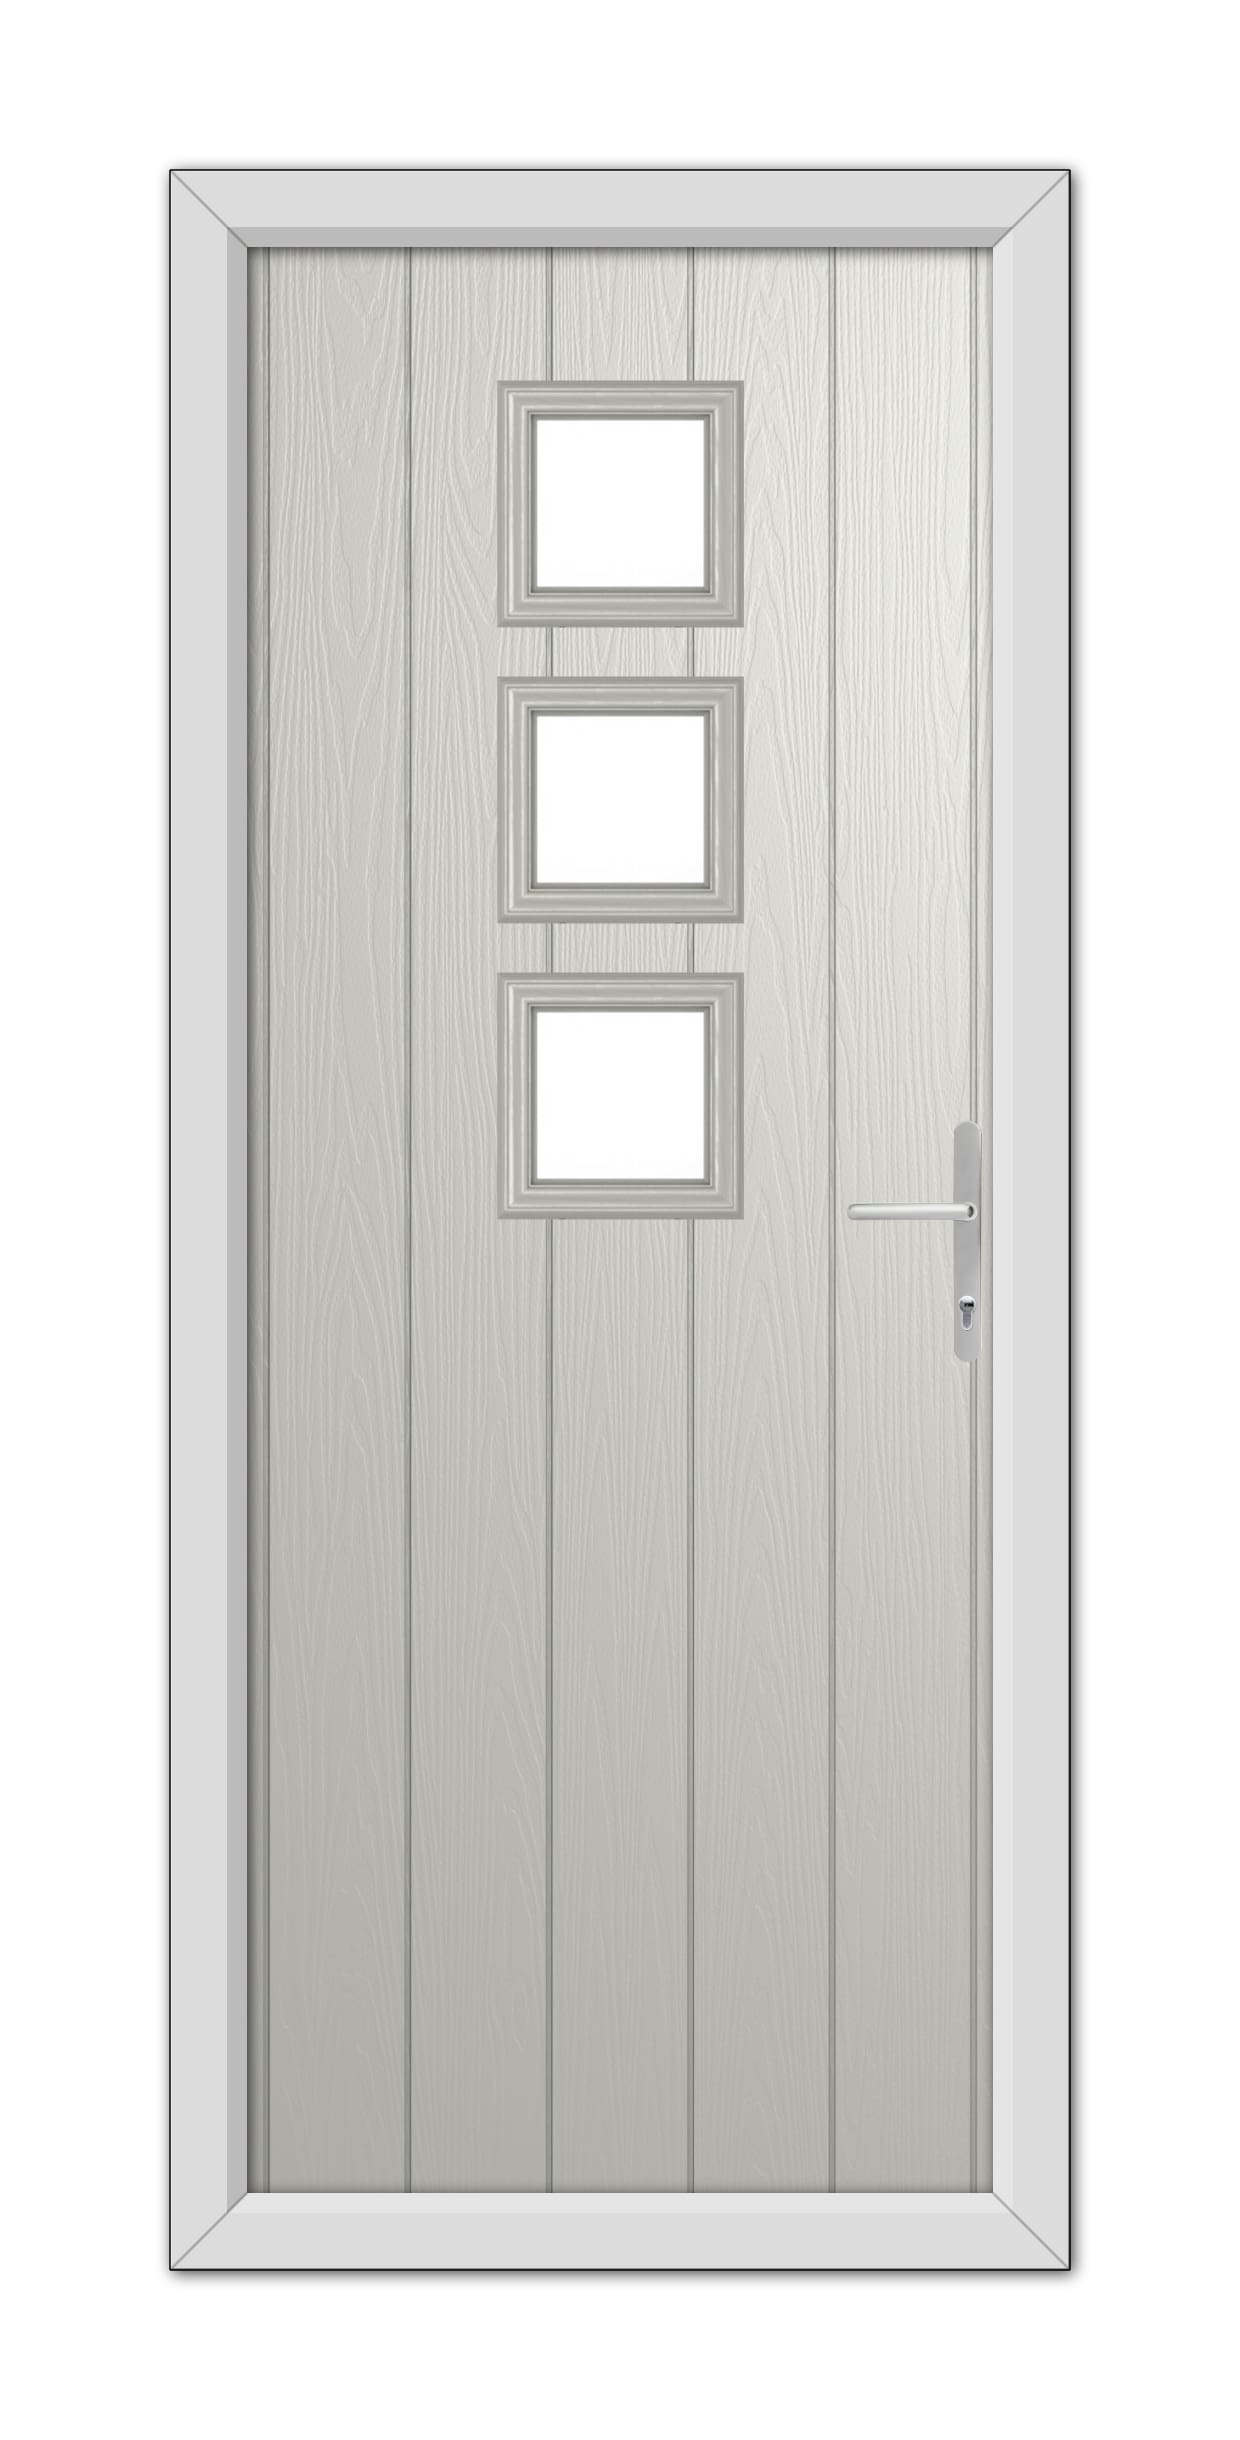 A modern Agate Grey Montrose Composite Door 48mm Timber Core with a vertical wood grain pattern, featuring three rectangular glass panels and a metal handle, set within a simple frame.